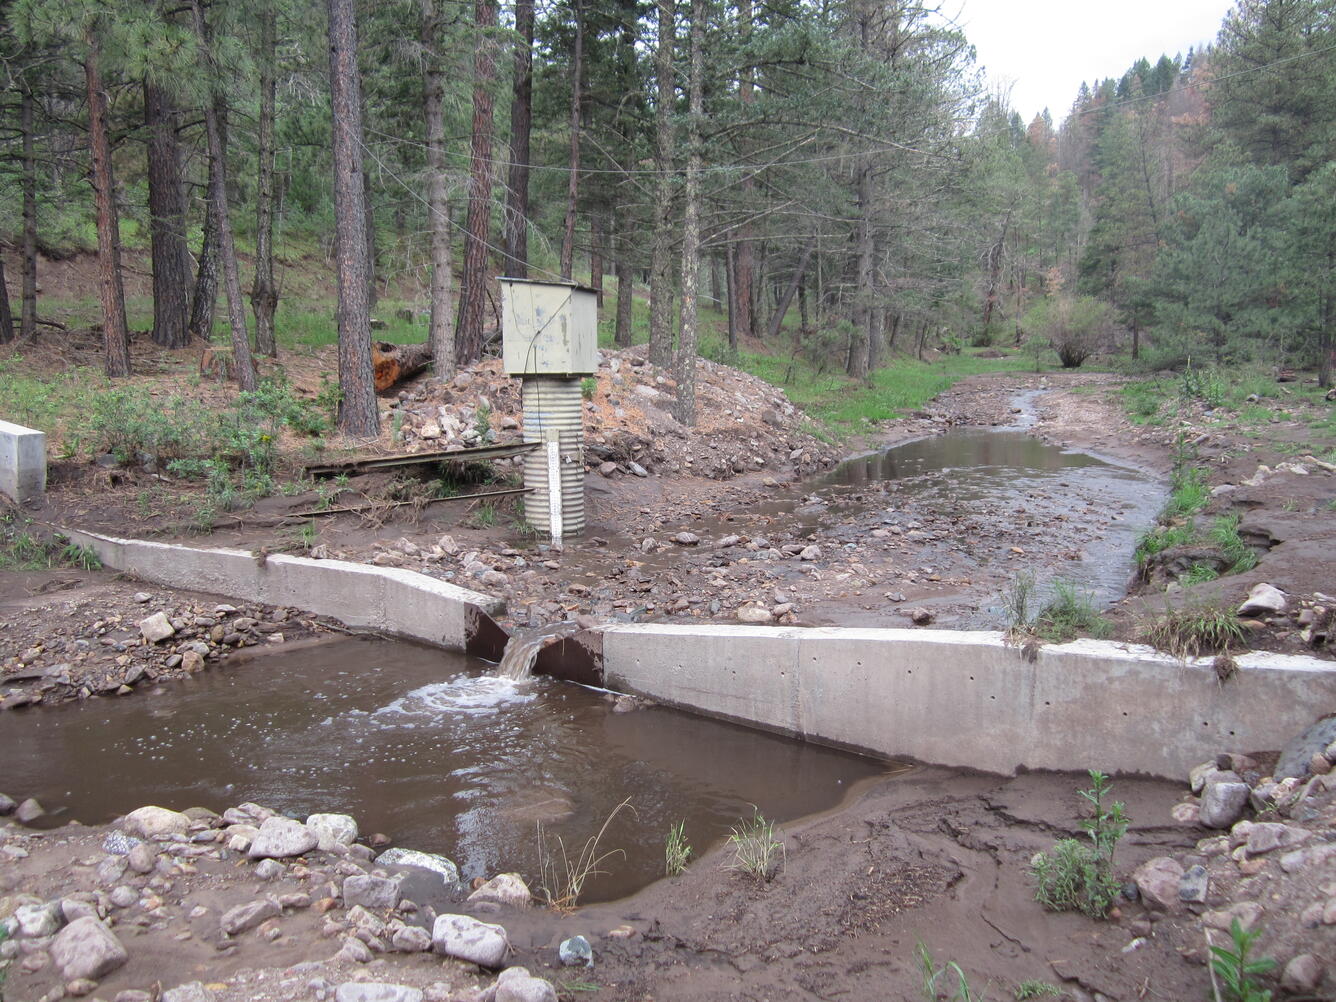 Streamflow-gaging station located on Eagle Creek below South Fork near Alto, New Mexico, July 2013.